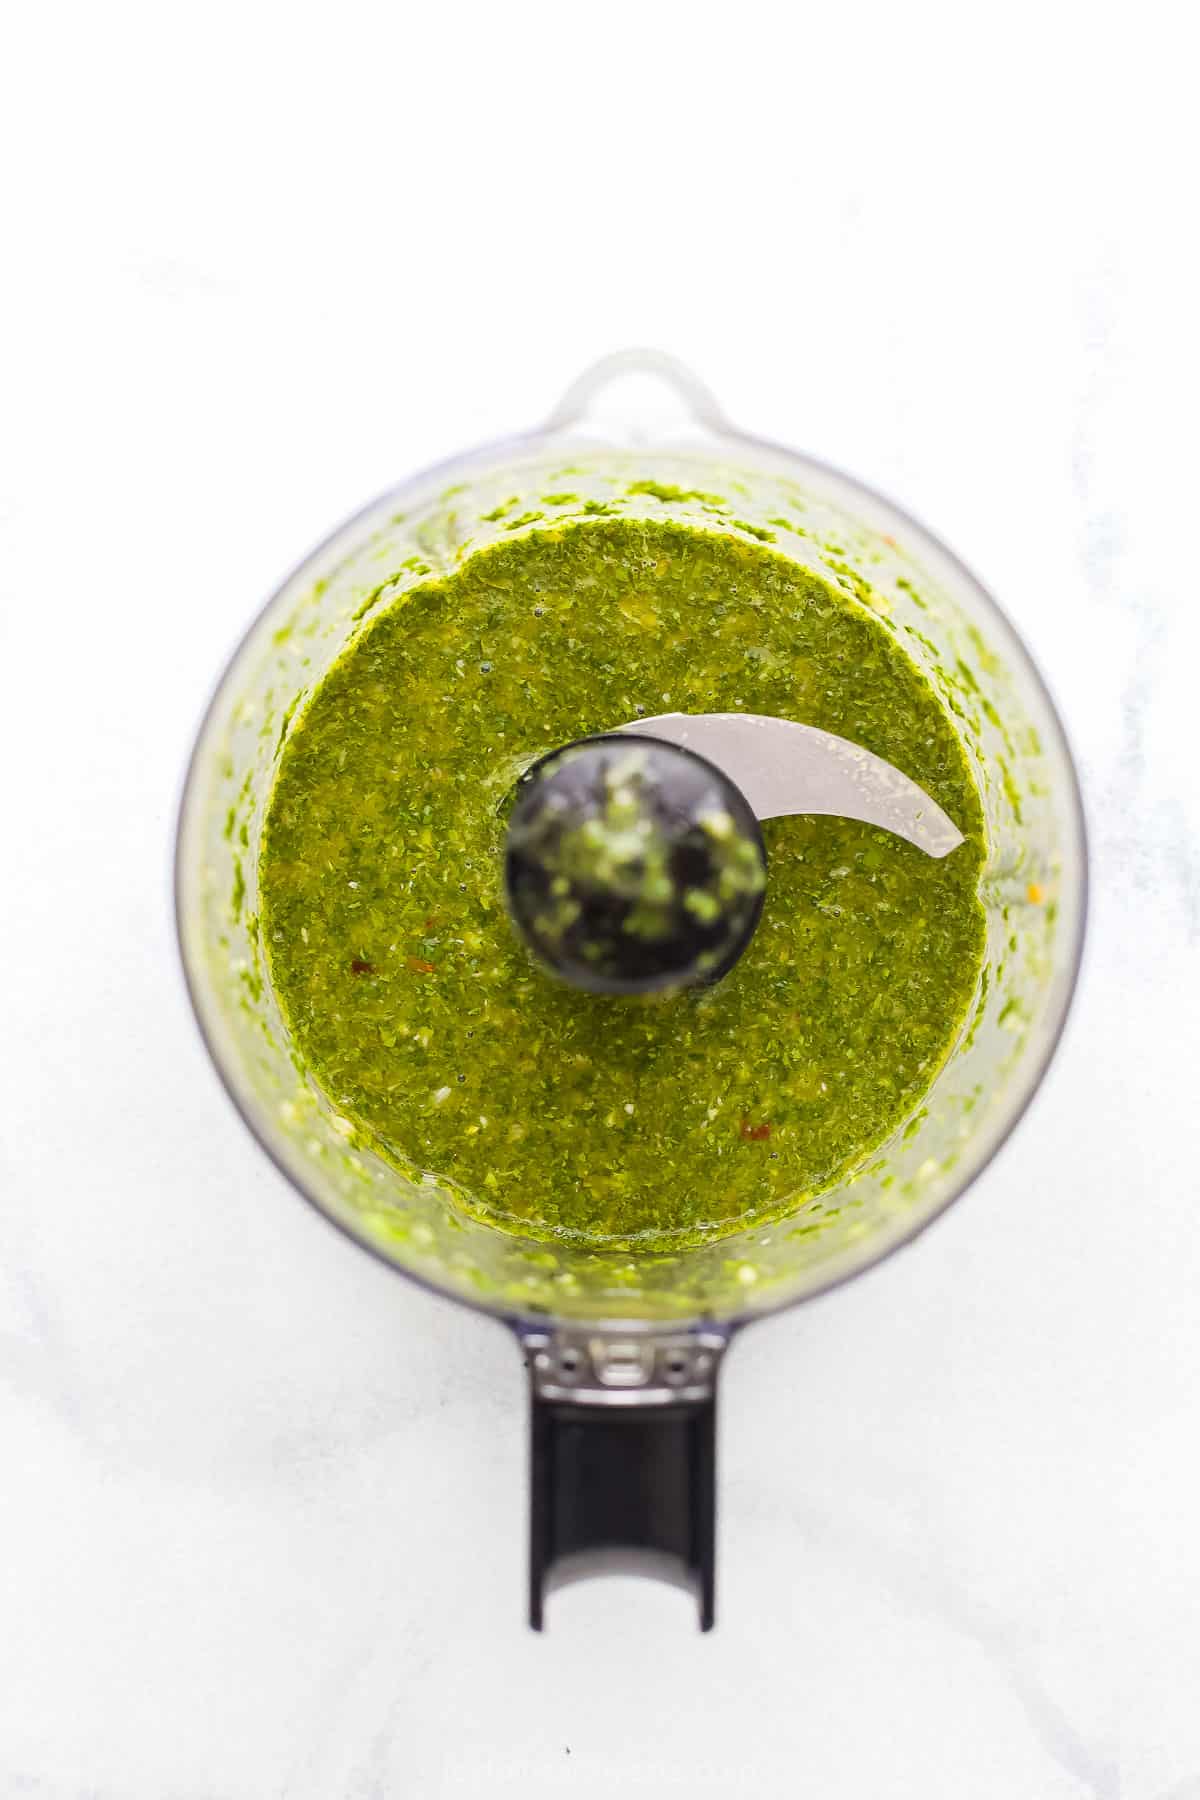 Homemade chimichurri dressing inside of a food processor on a marble countertop